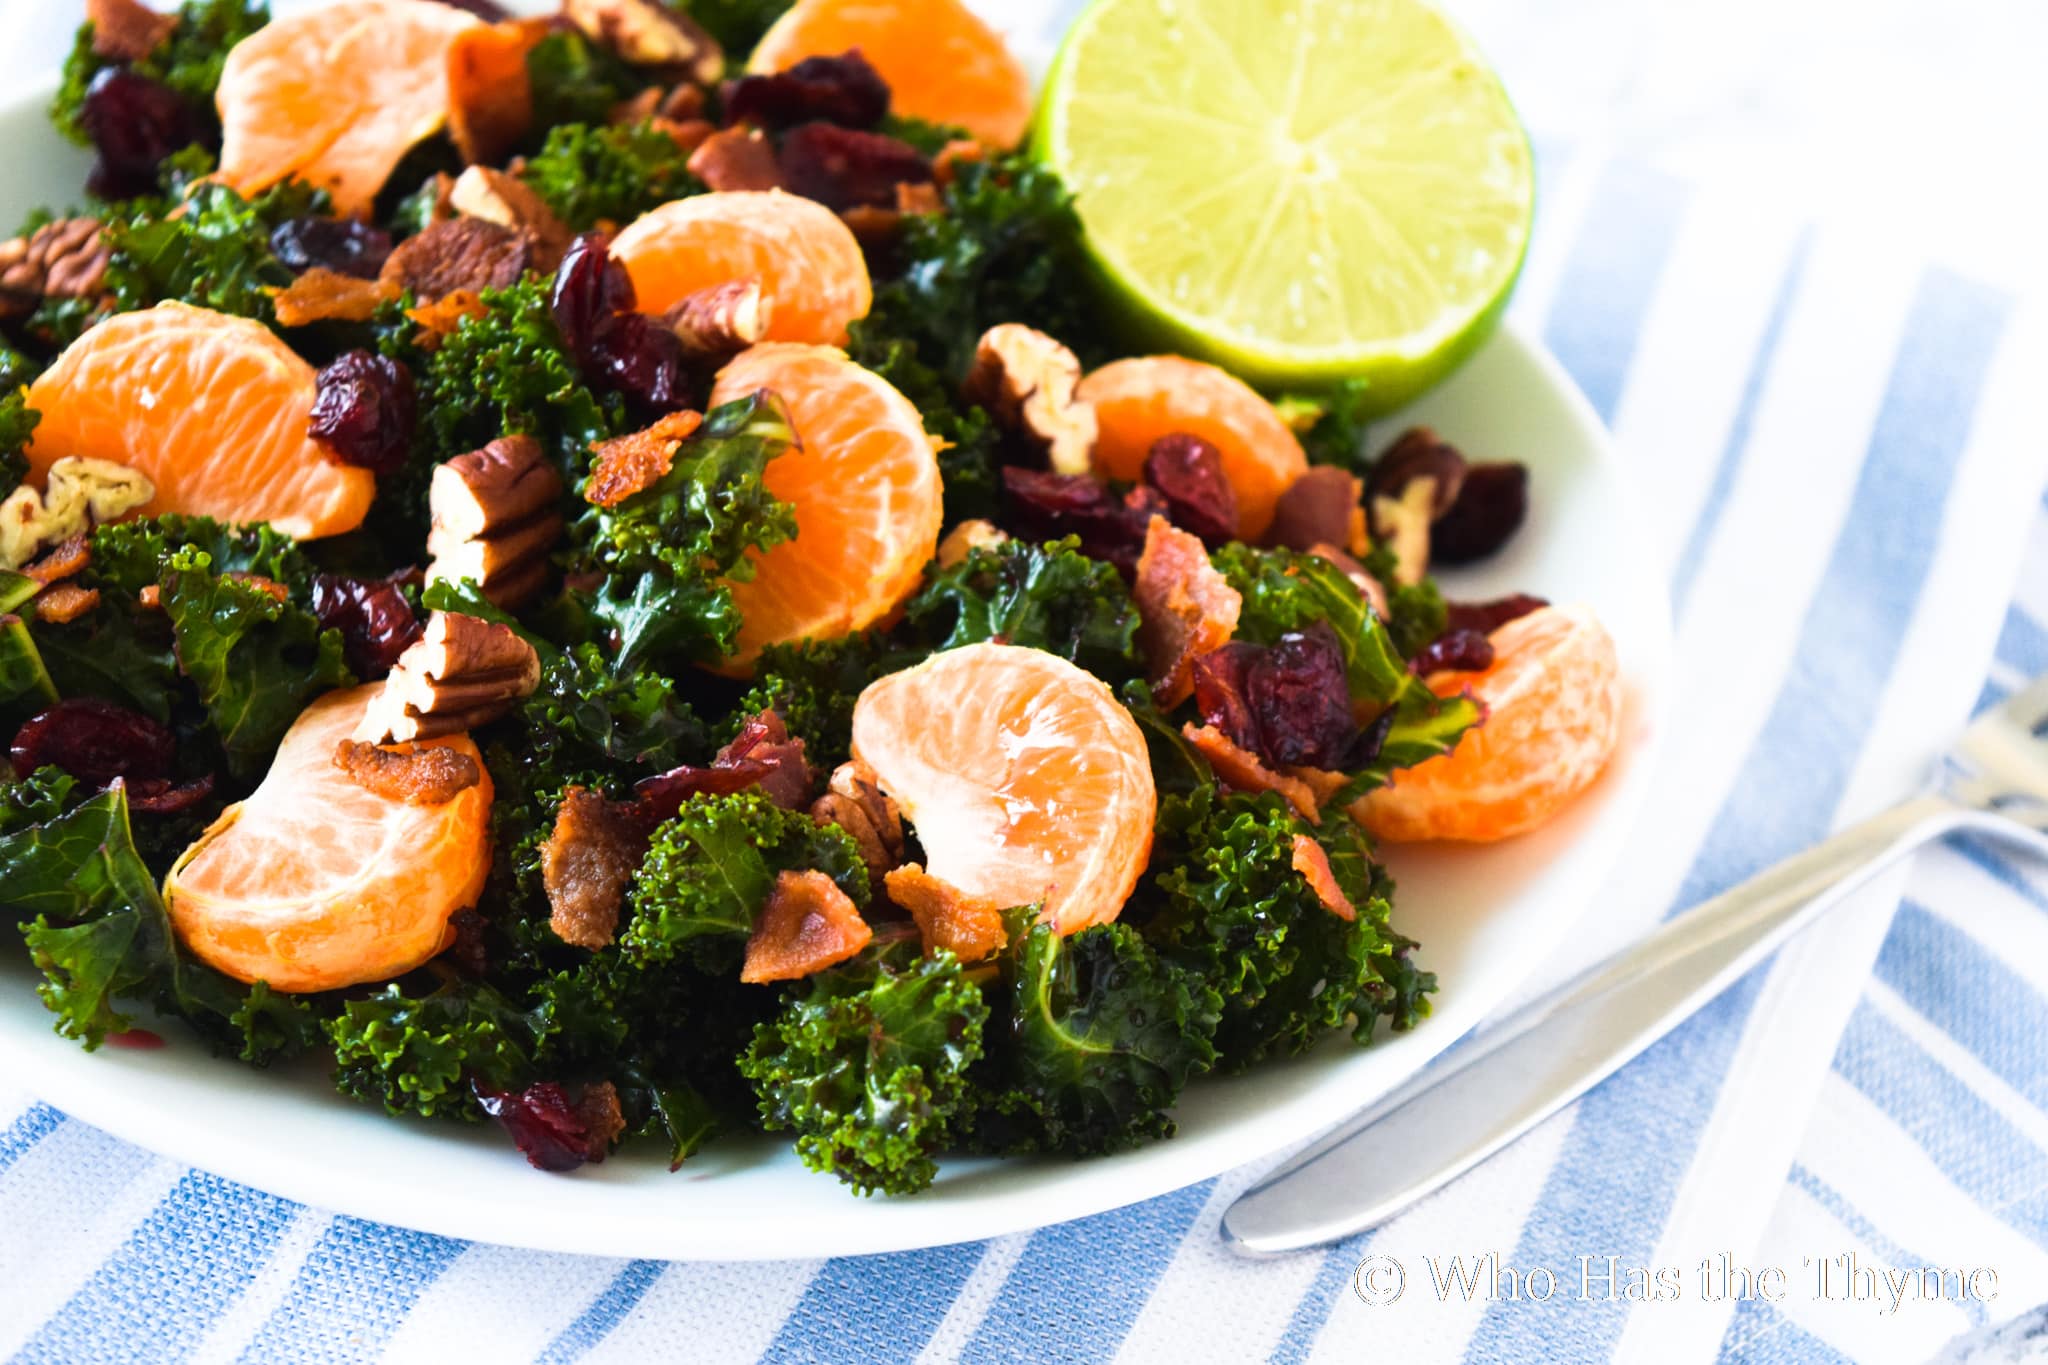 Healthy lunch kale salad with citrus